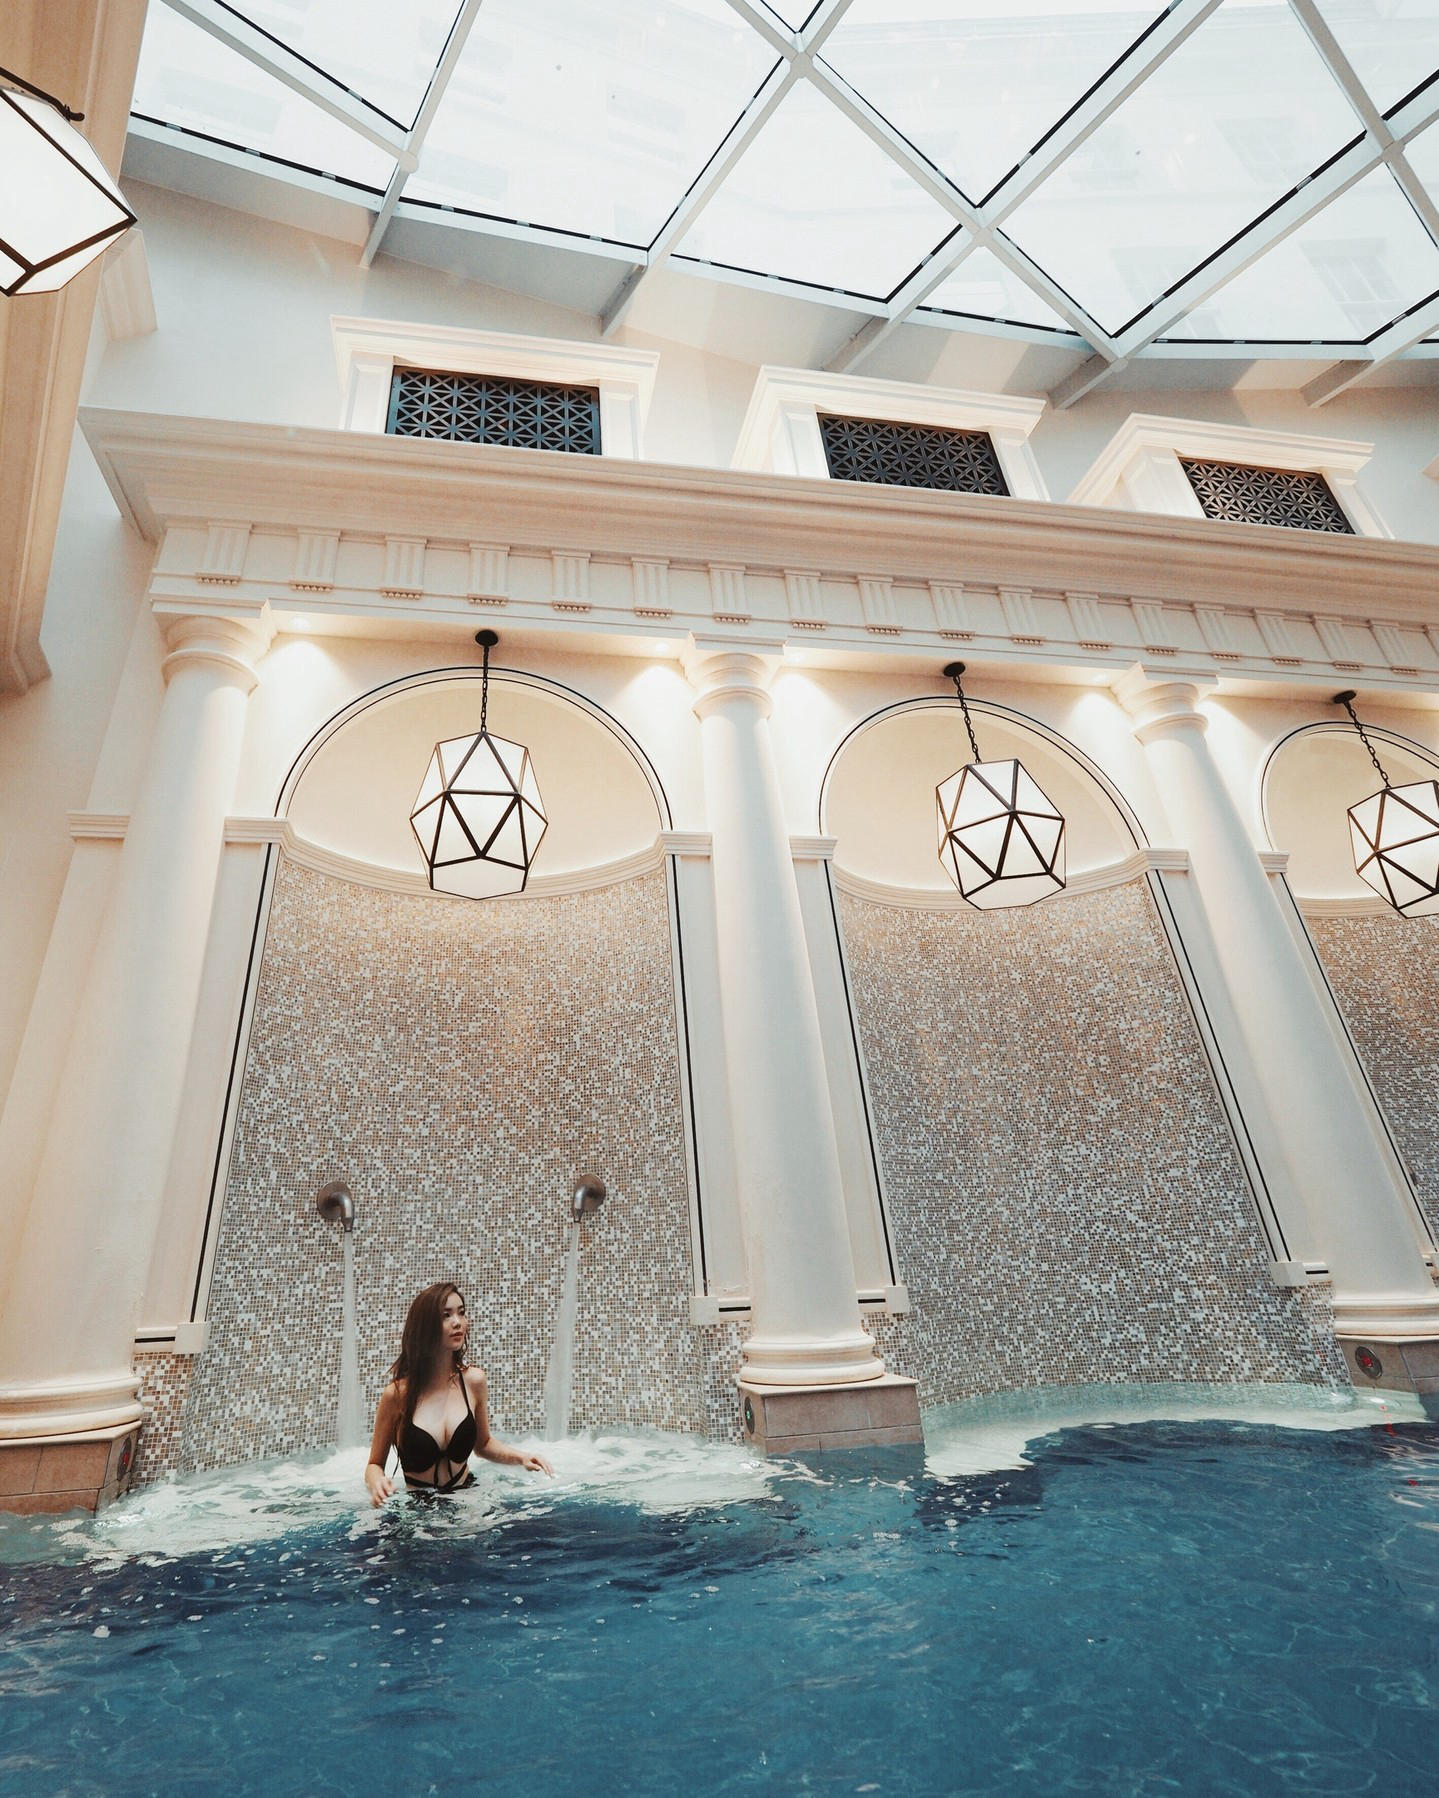 image  1 Spend the day relaxing in the healing waters of #SpaVillage Bath, truly the perfect way to unwind af